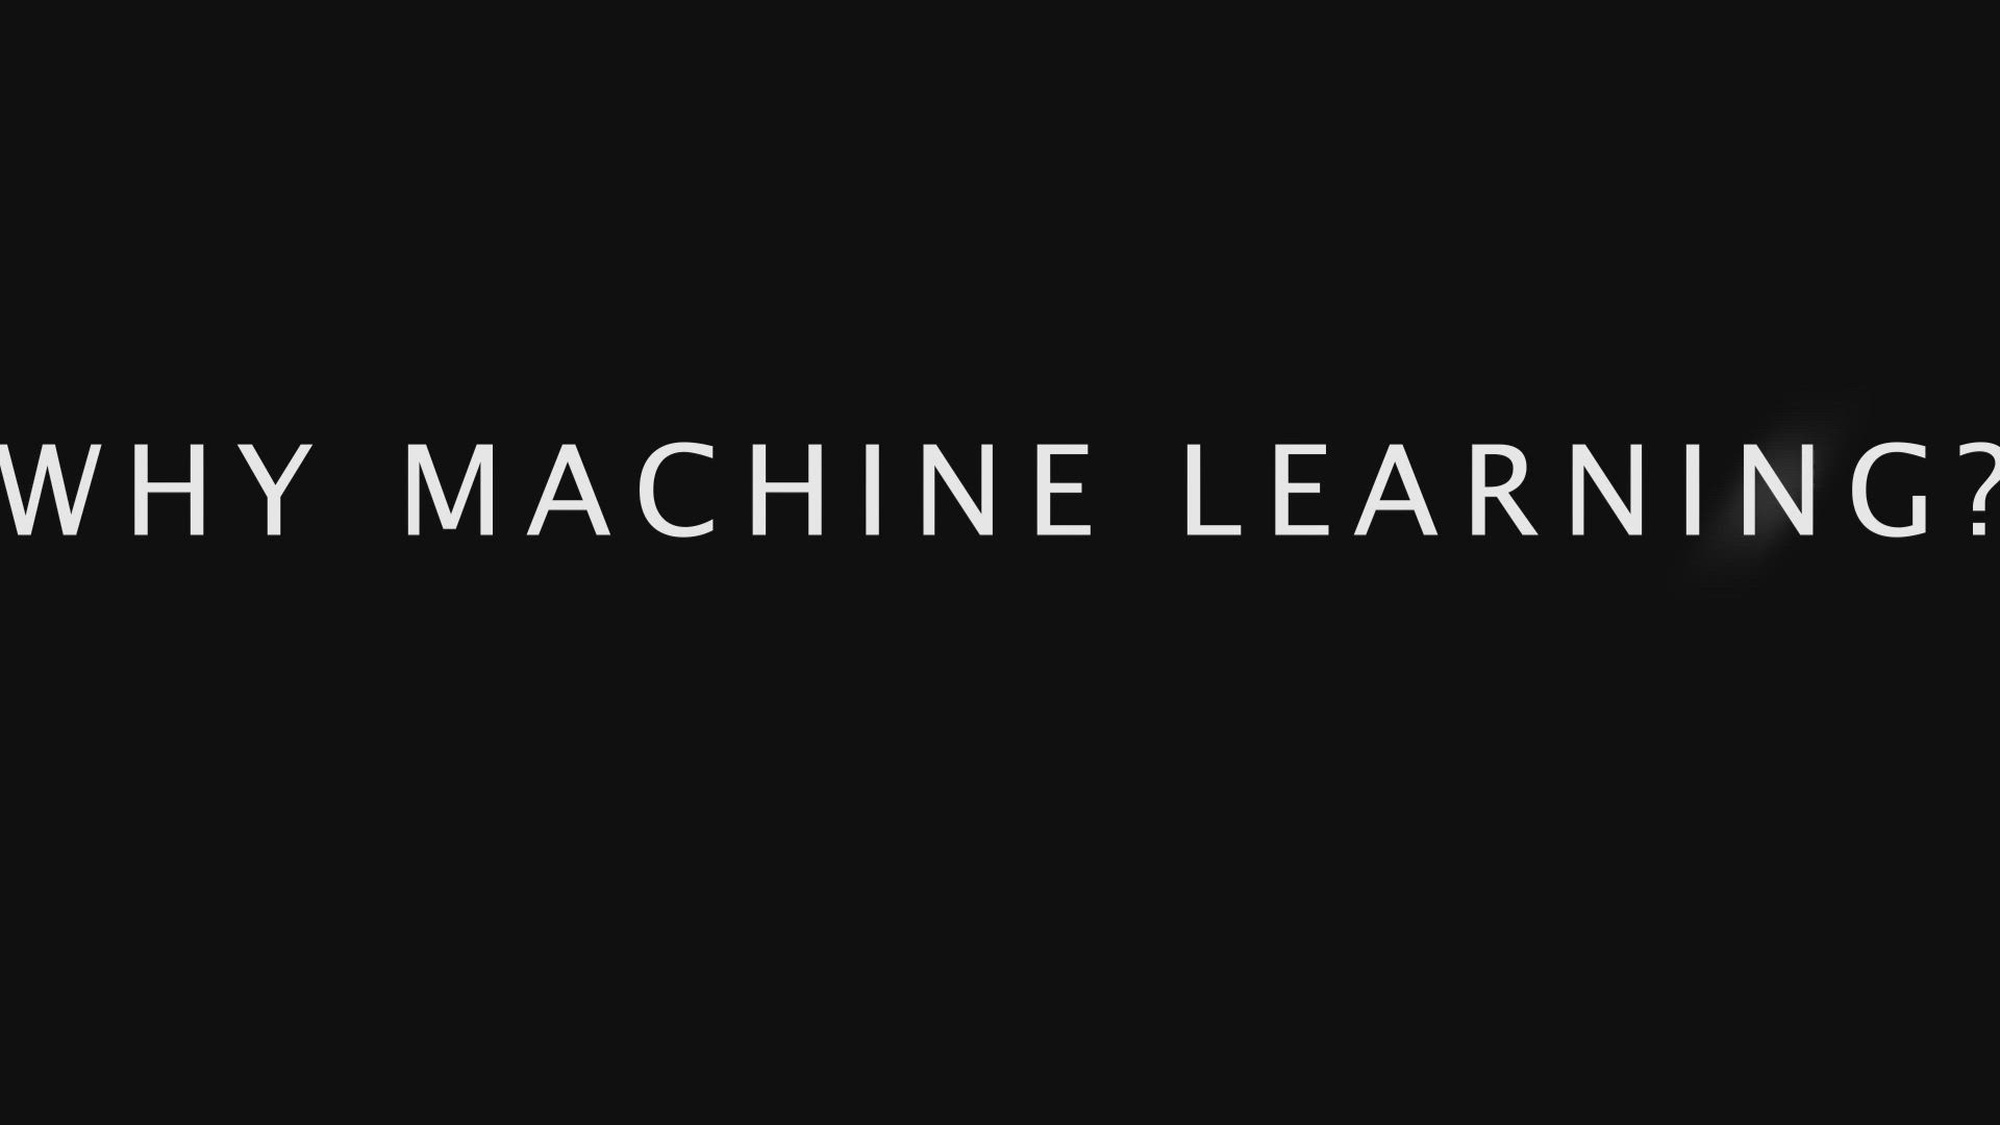 Video on why machine learning is important and how it works.